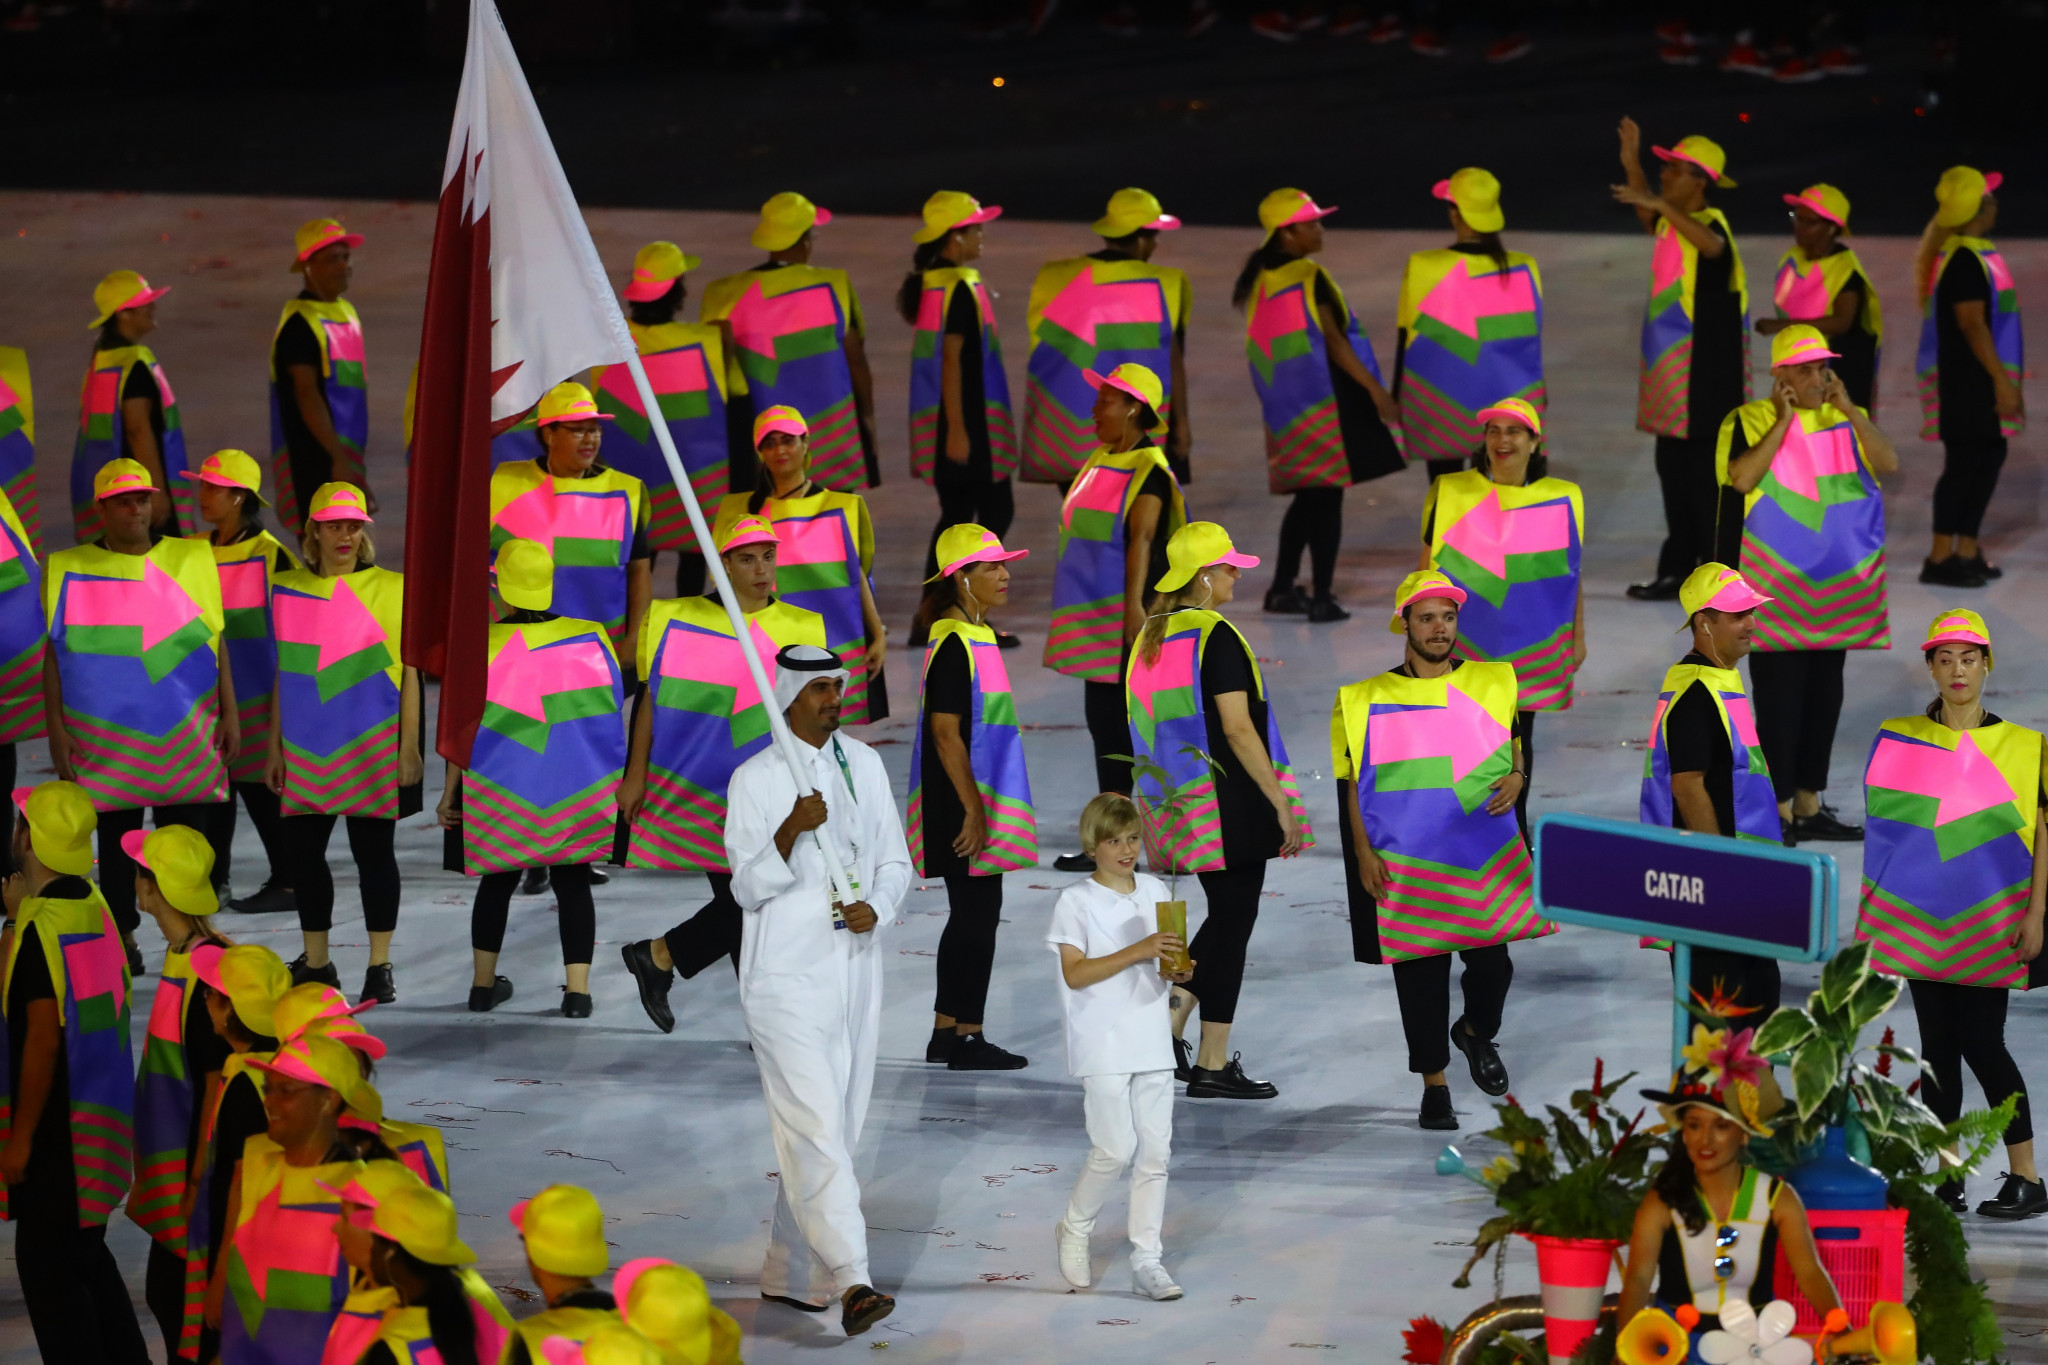 Sheikh Ali al-Thani carried Qatar's flag at the Rio 2016 Opening Ceremony ©Getty Images